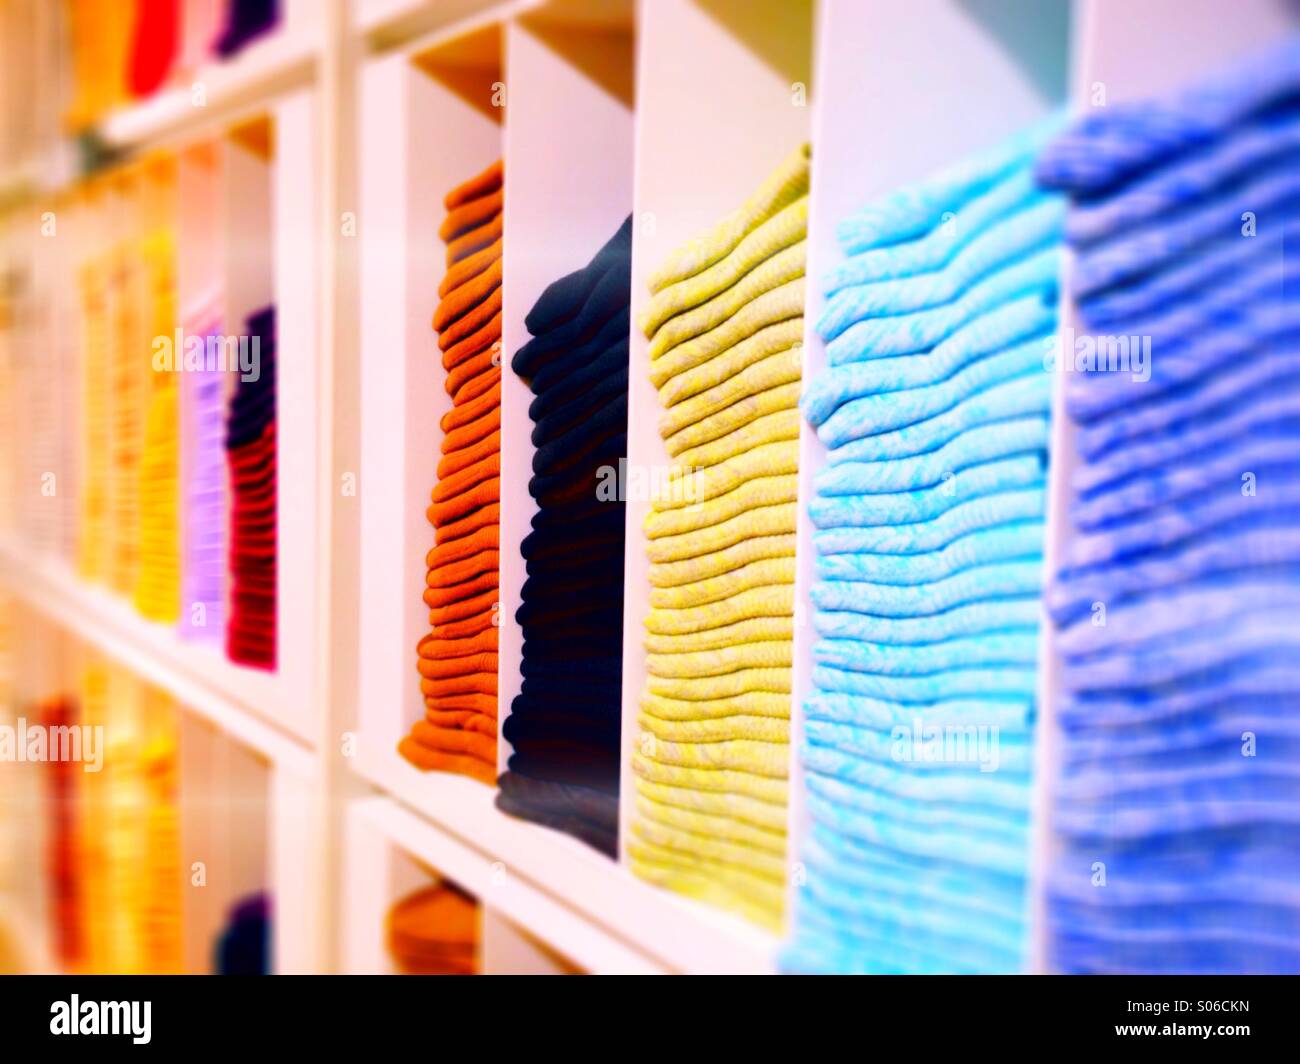 A choice of colour - merchandise for sale. Stock Photo